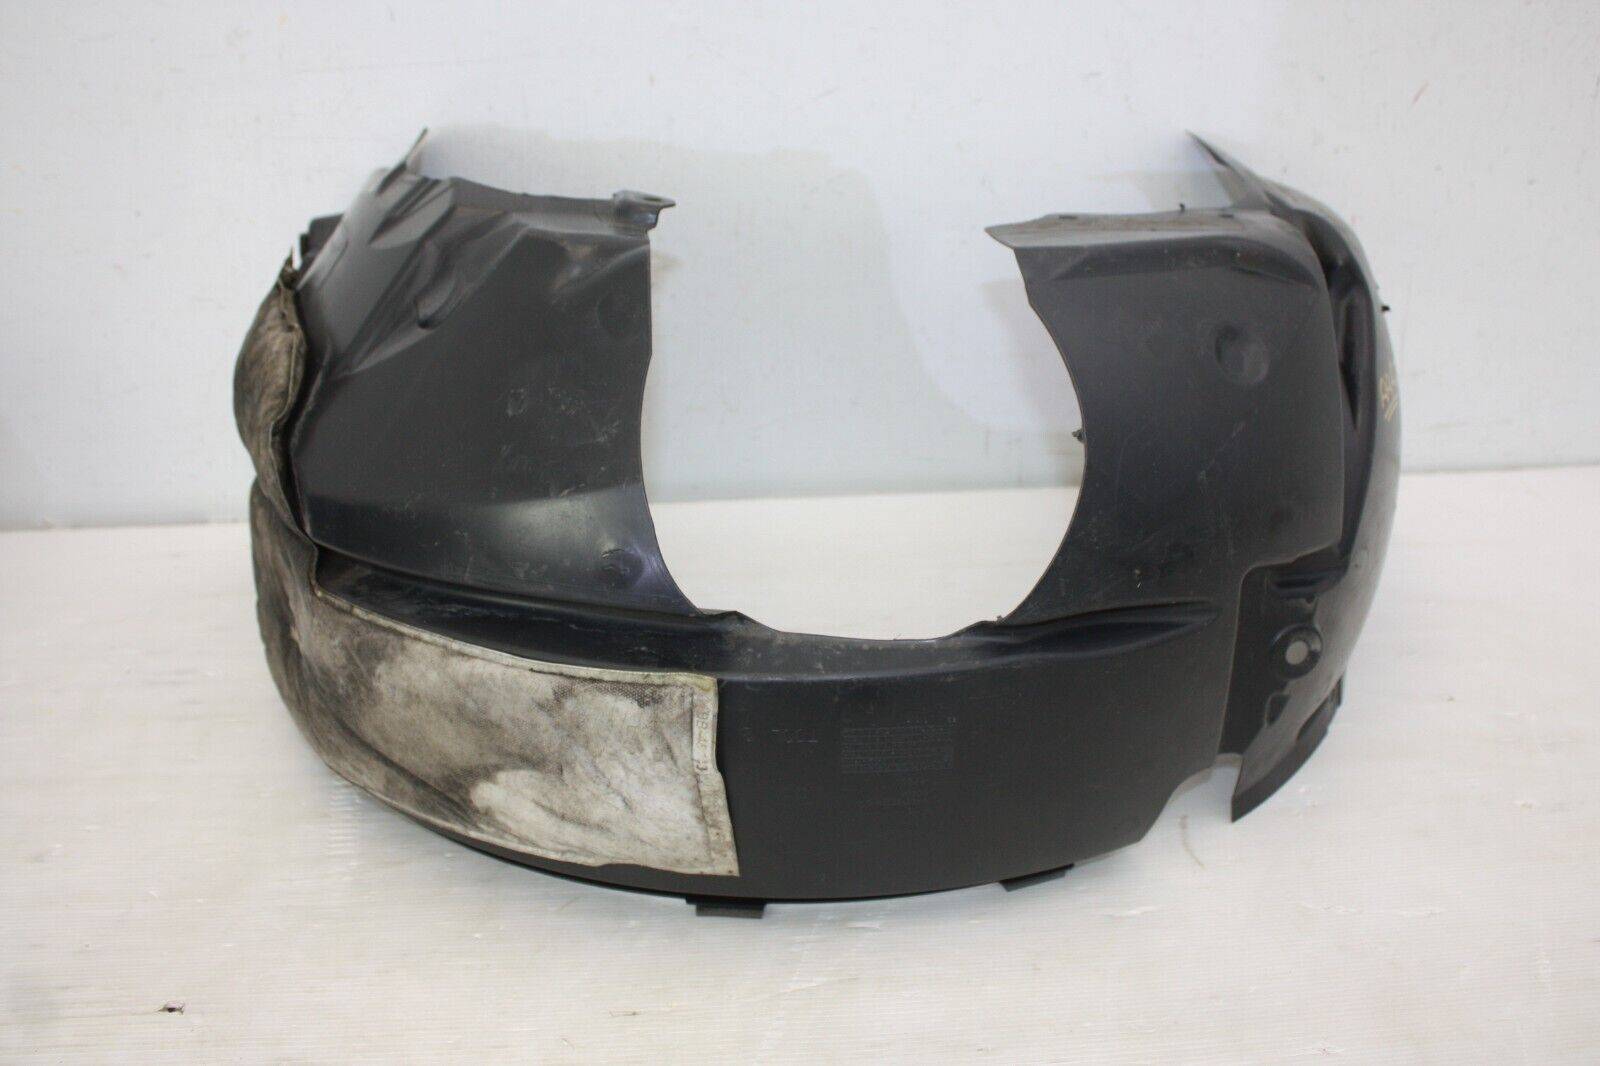 Ford-Fiesta-Front-Right-Side-Wheel-Liner-Splash-Guard-2008-to-2012-8A61-16114-B-175656992480